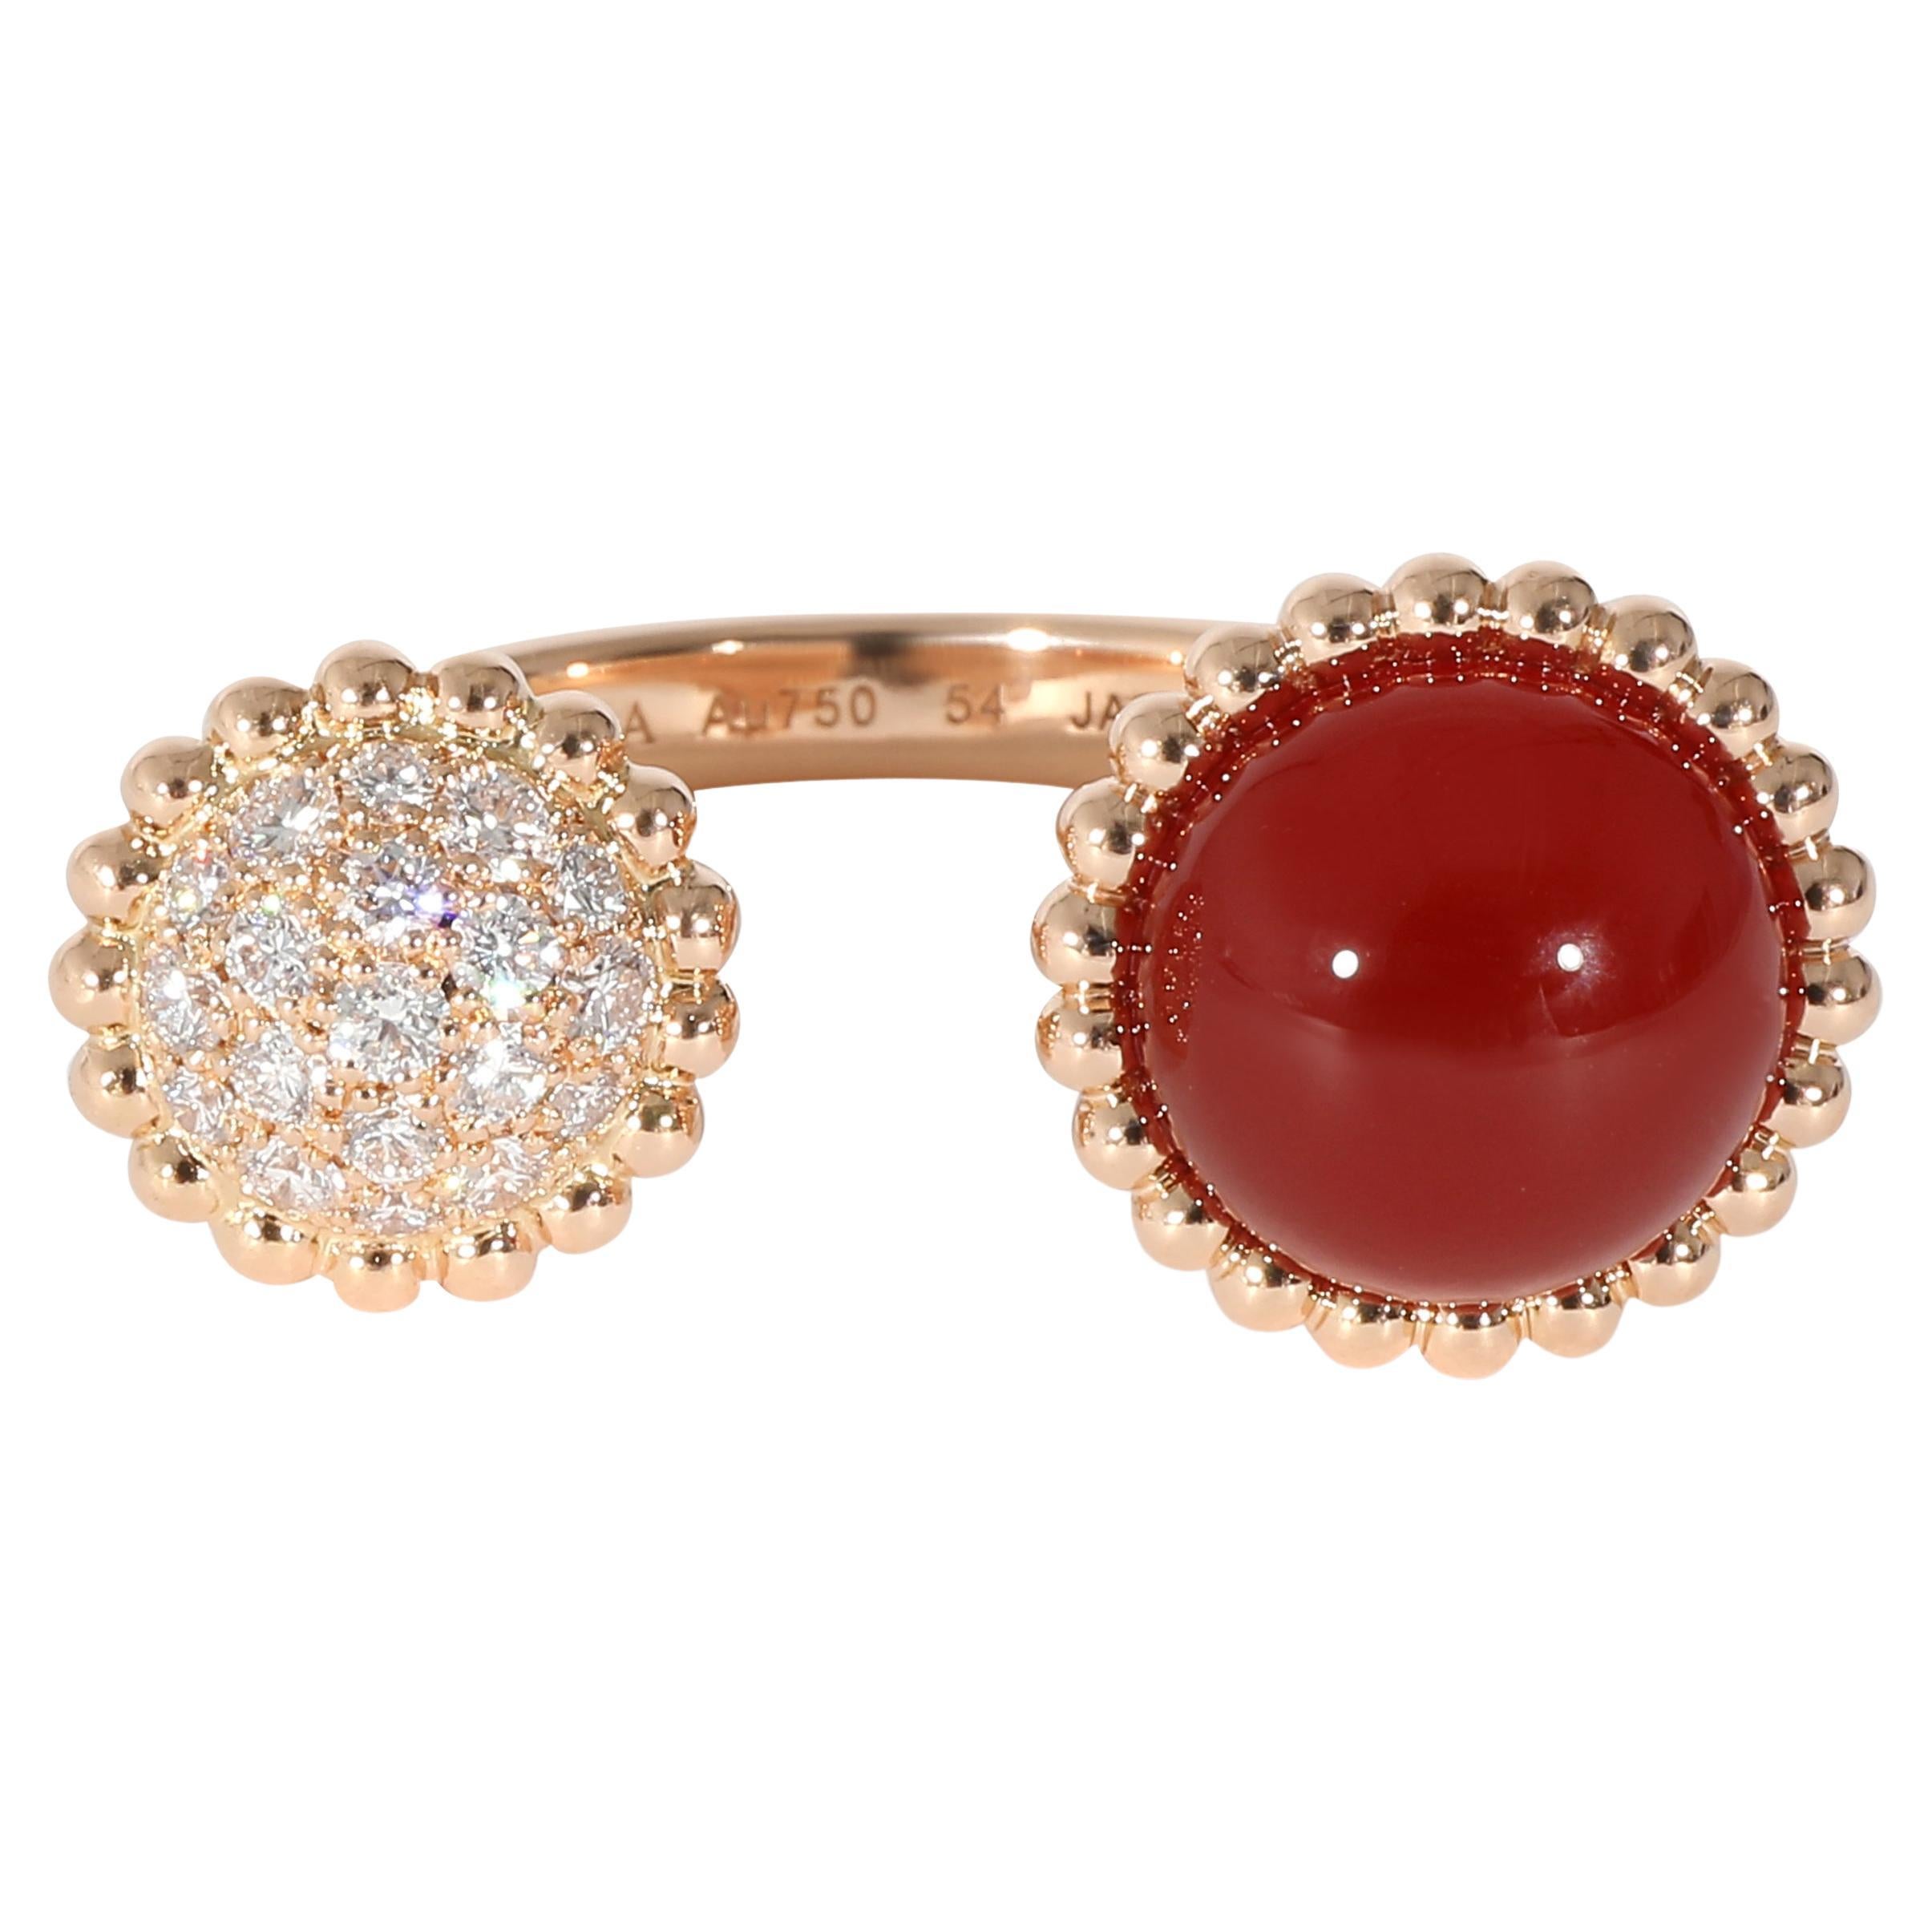 What is the red stone in Van Cleef and Arpels?